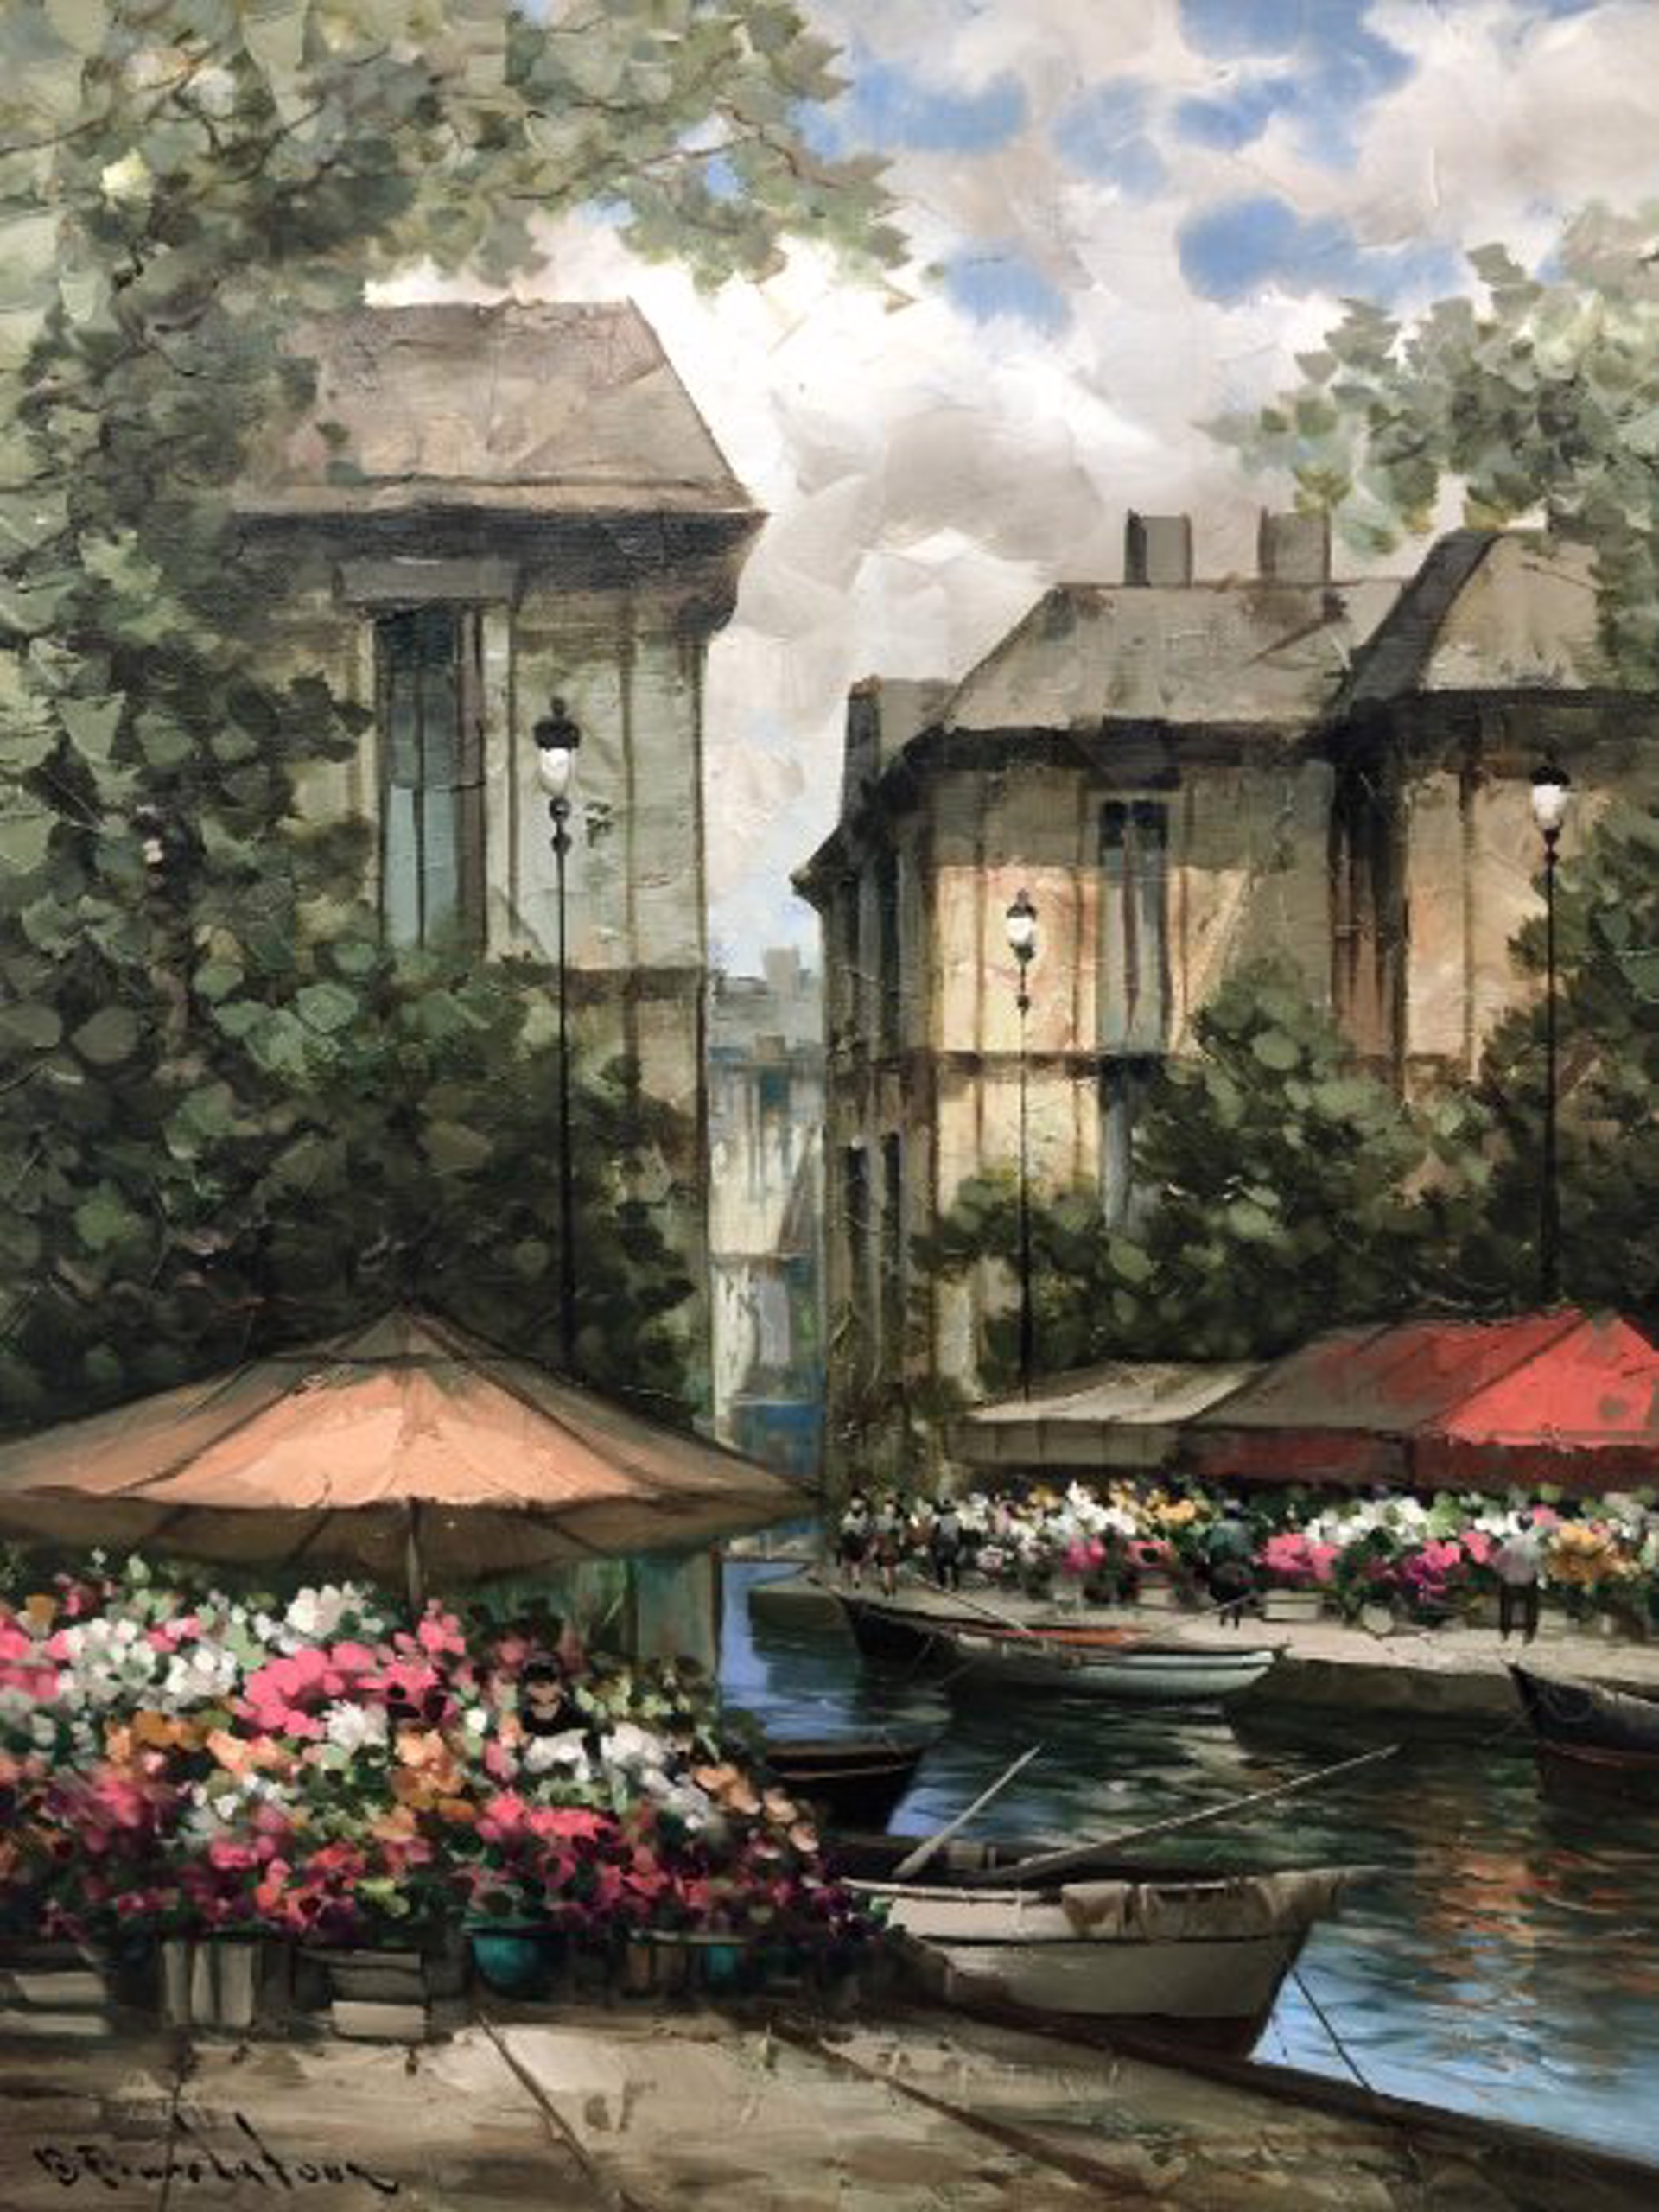 Flower Market on Canal by Pierre Latour